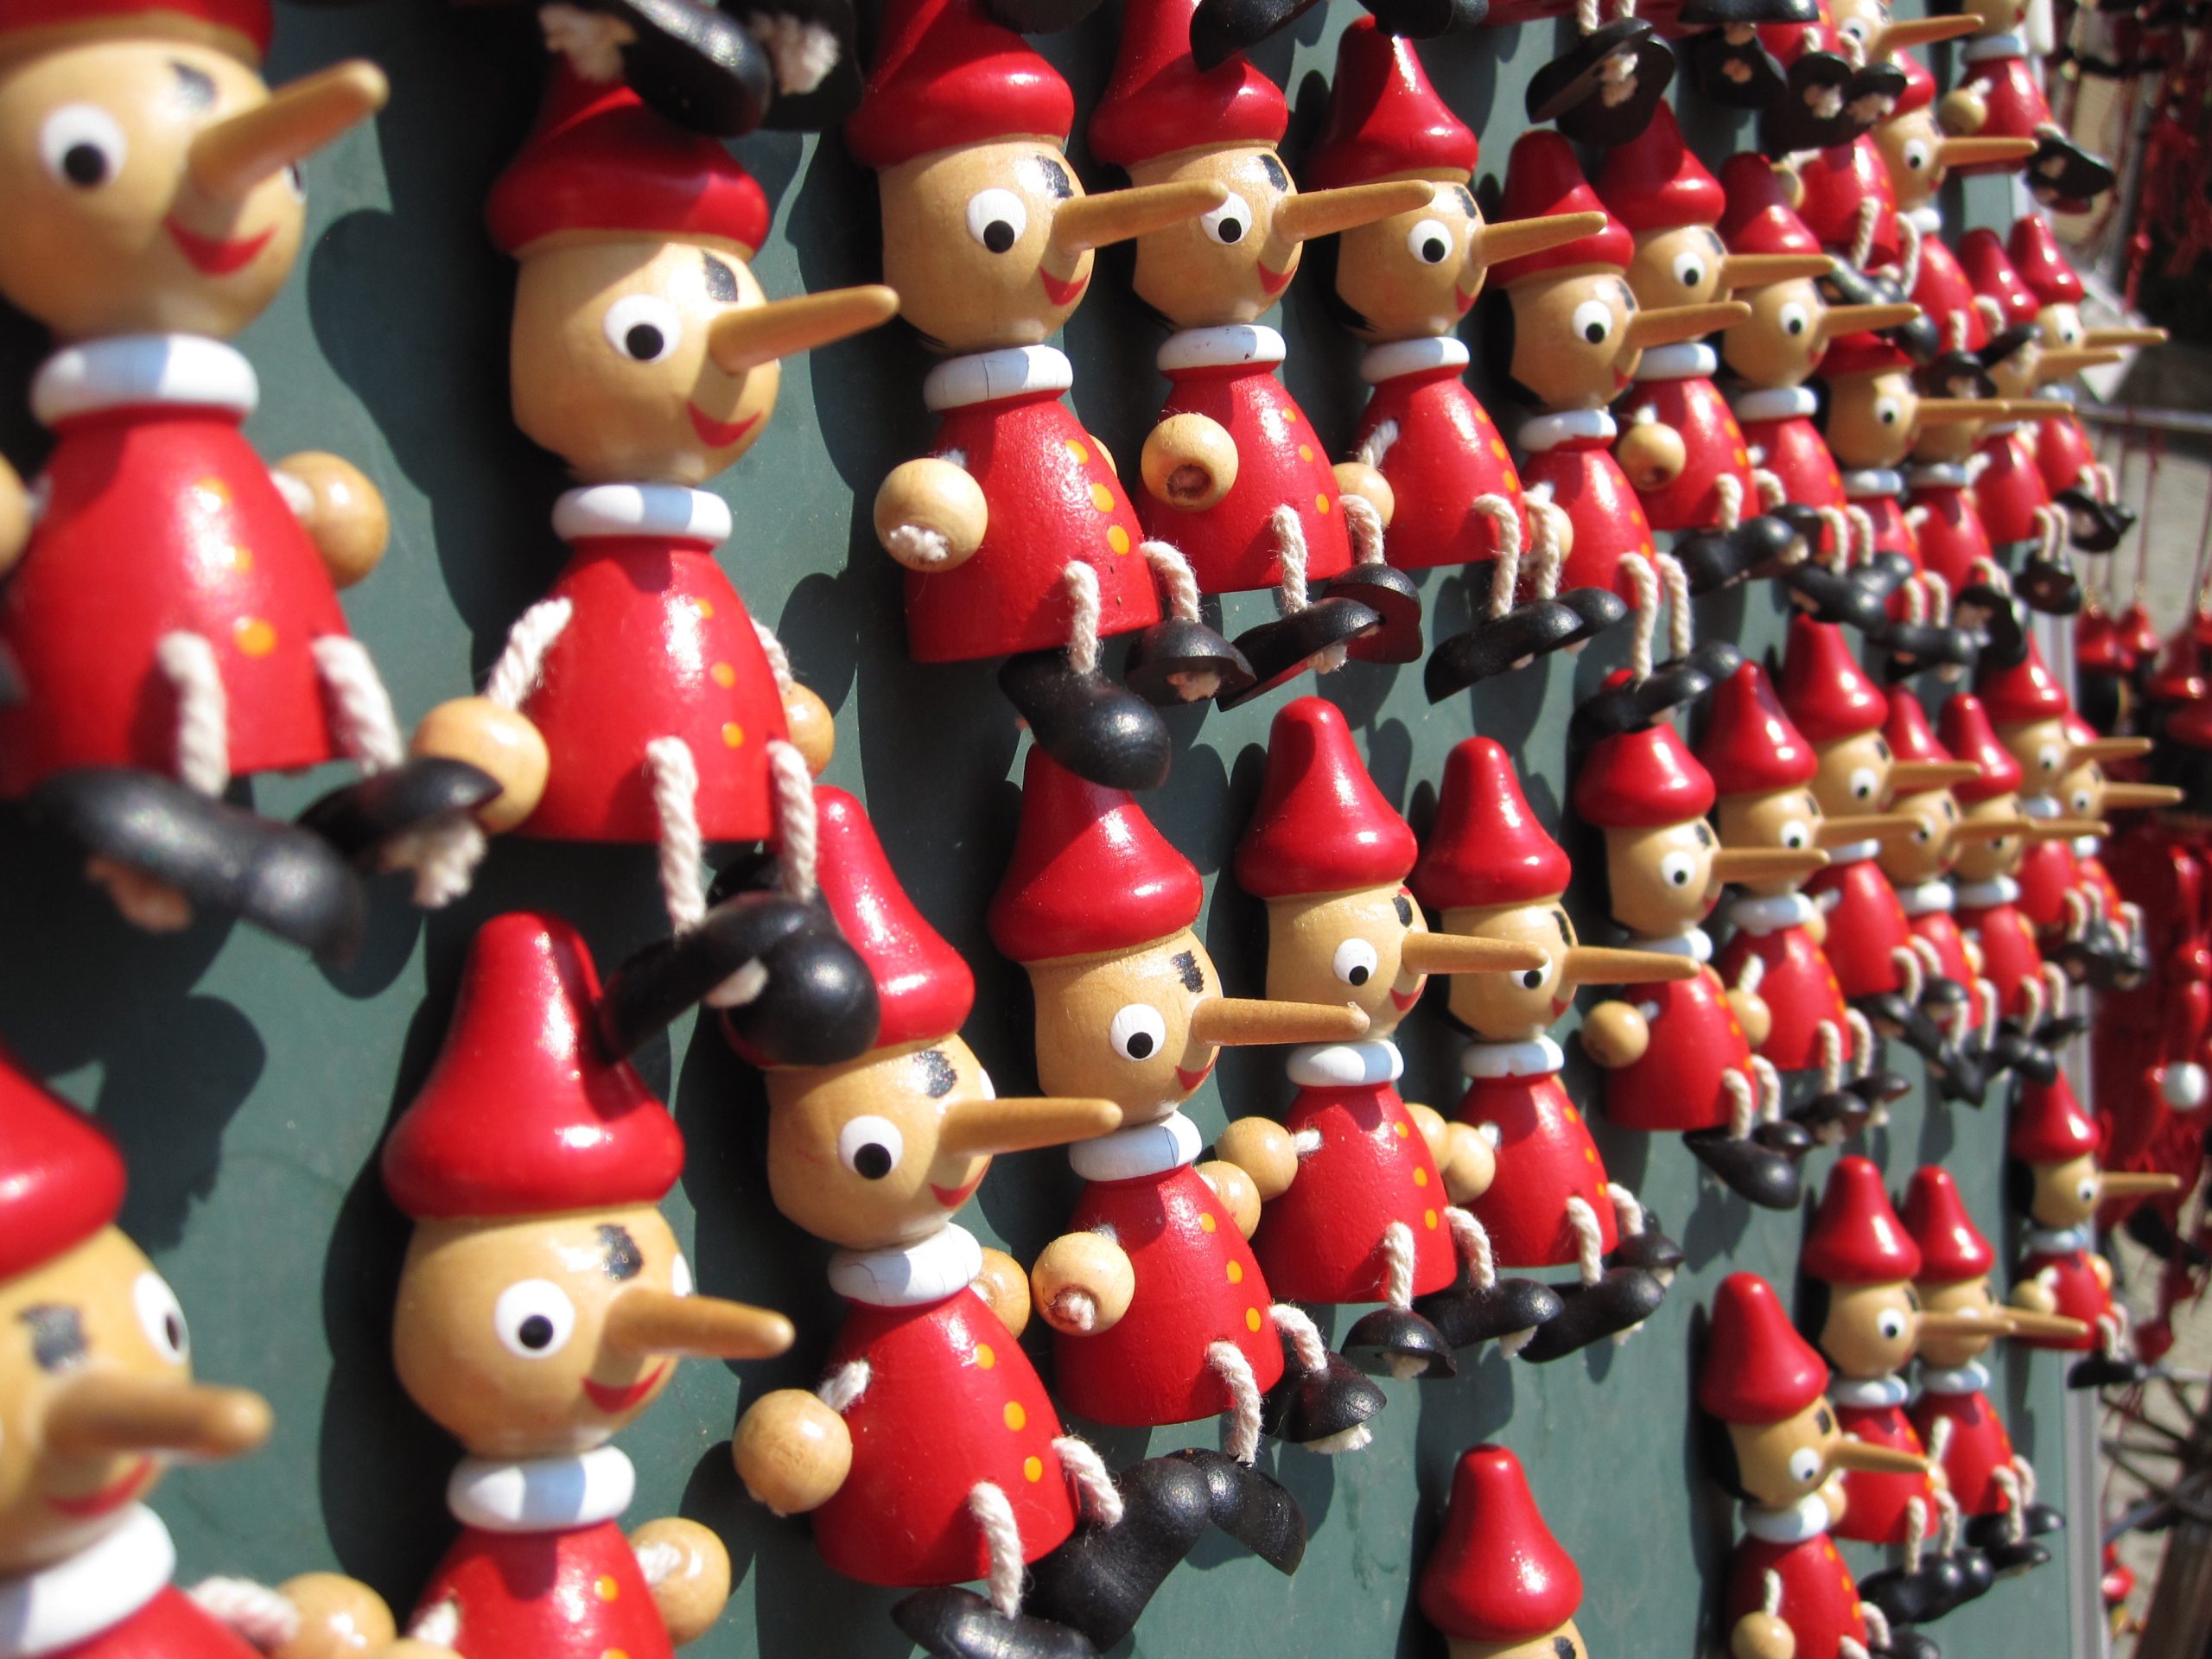 Rows of identical Pinocchio figures.